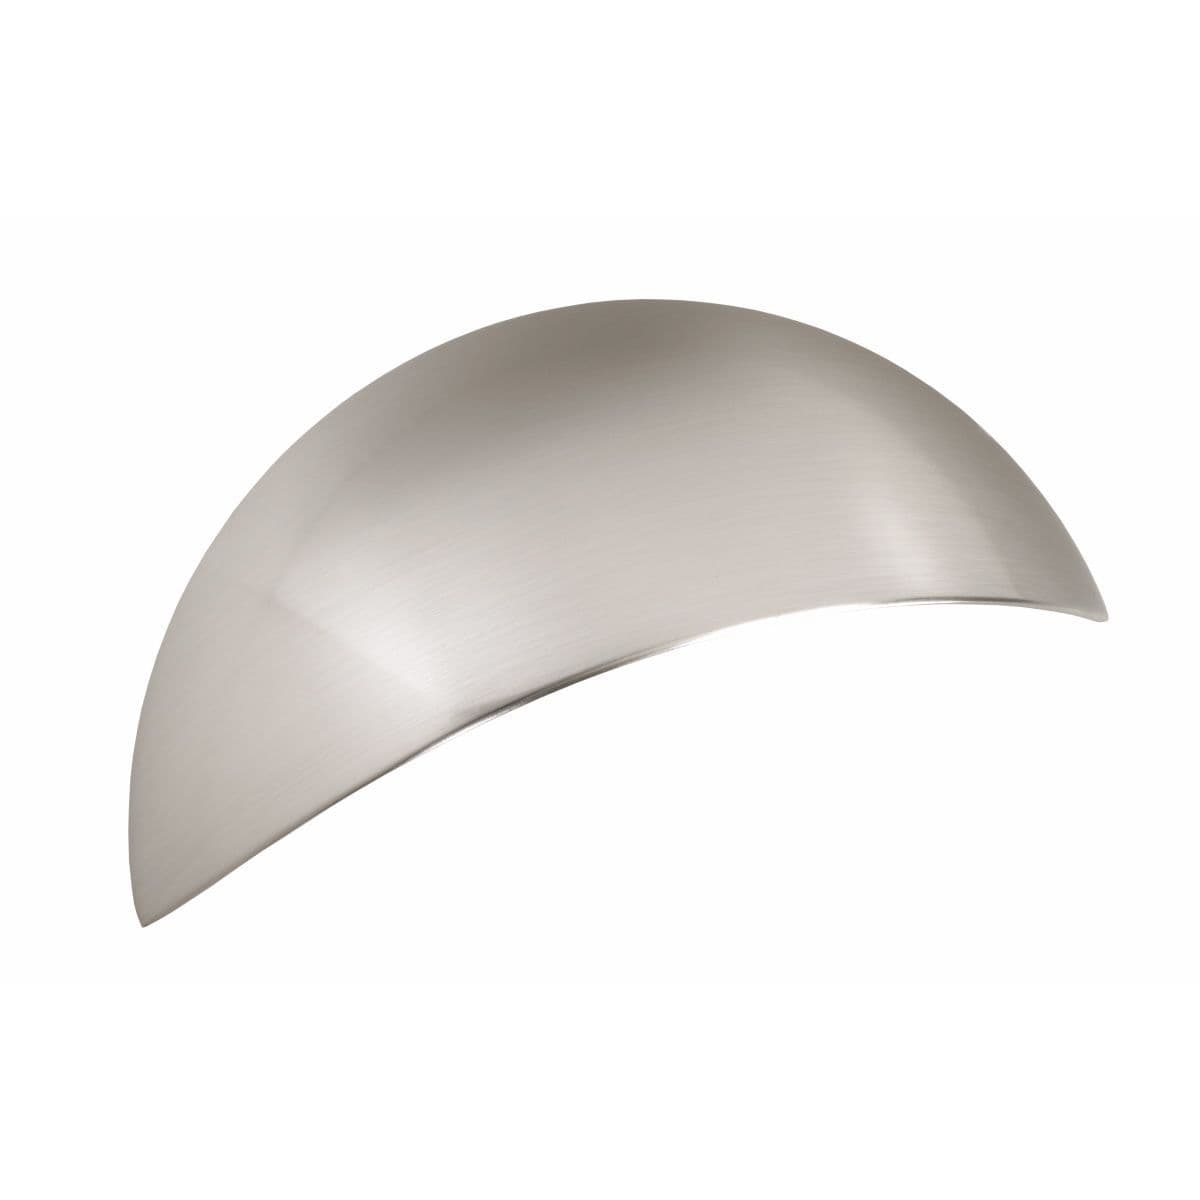 HILL CUP Cupboard Handle - 64mm h/c size - POLISHED STAINLESS STEEL EFFECT finish (PWS H1070.64.SS)